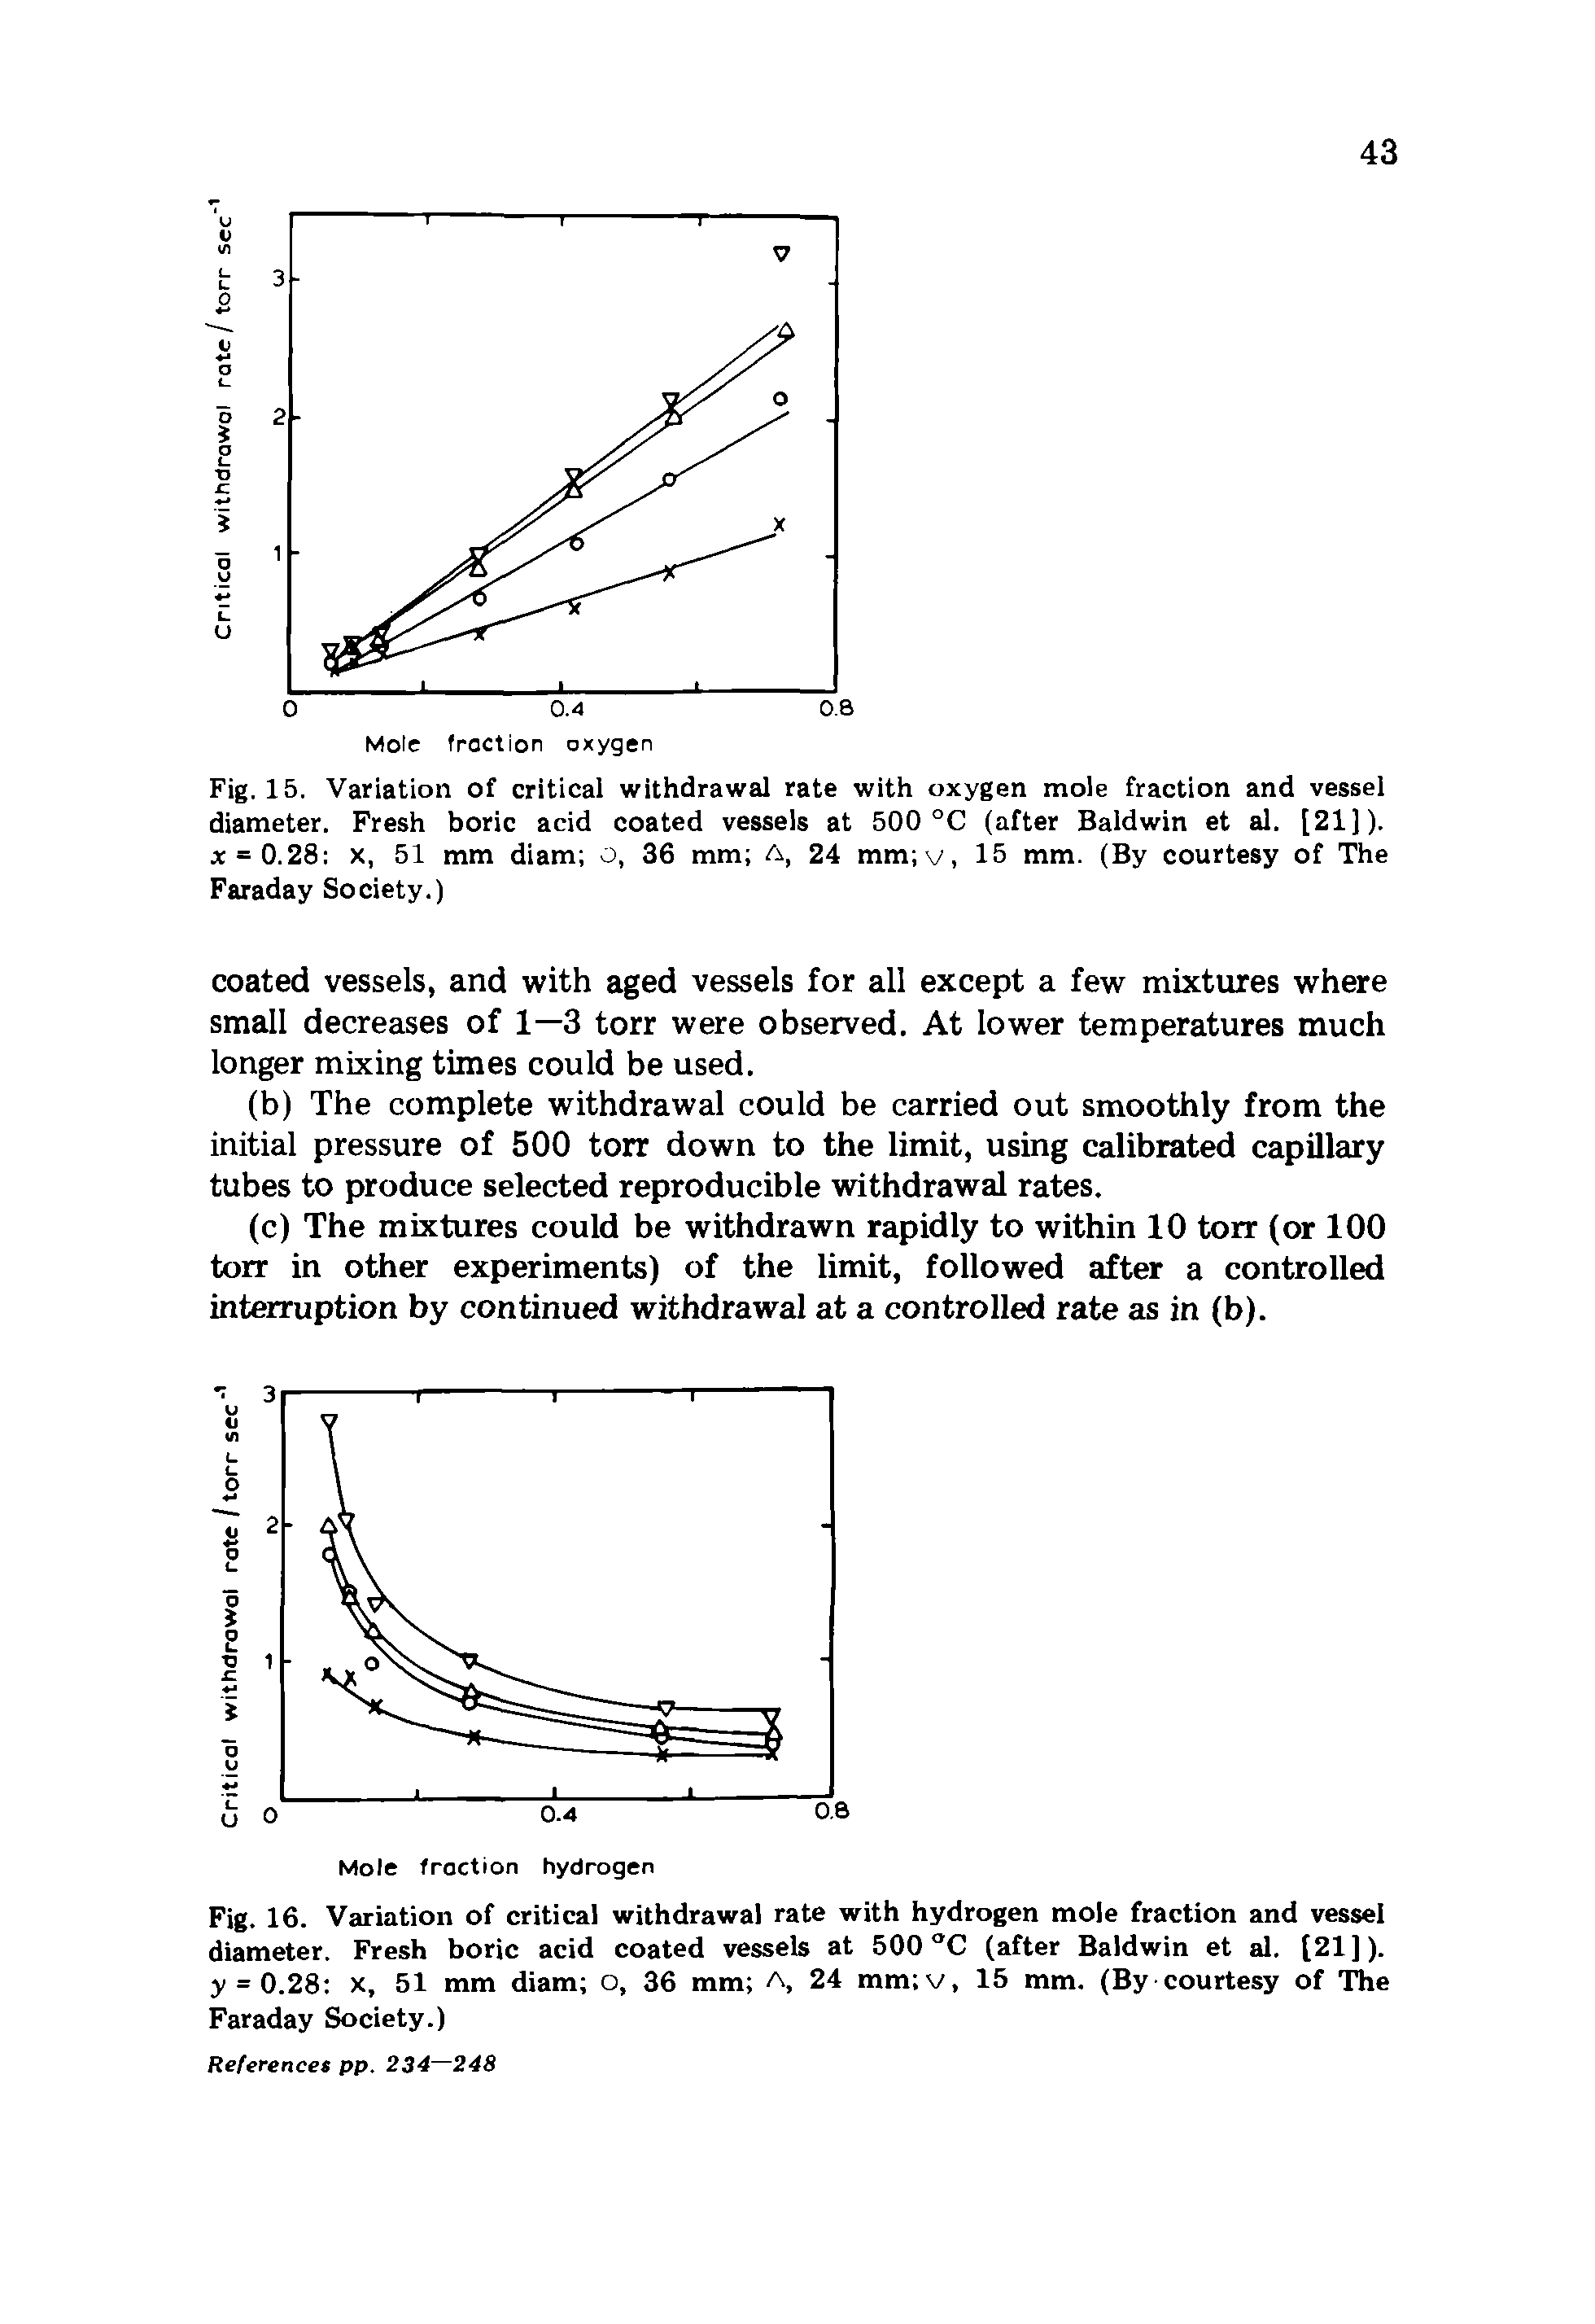 Fig. 15. Variation of critical withdrawal rate with oxygen mole fraction and vessel diameter. Fresh boric acid coated vessels at 500 °C (after Baldwin et al. [21]). x = 0.28 X, 51 mm diam o, 36 mm A, 24 mm v, 15 mm. (By courtesy of The Faraday Society.)...